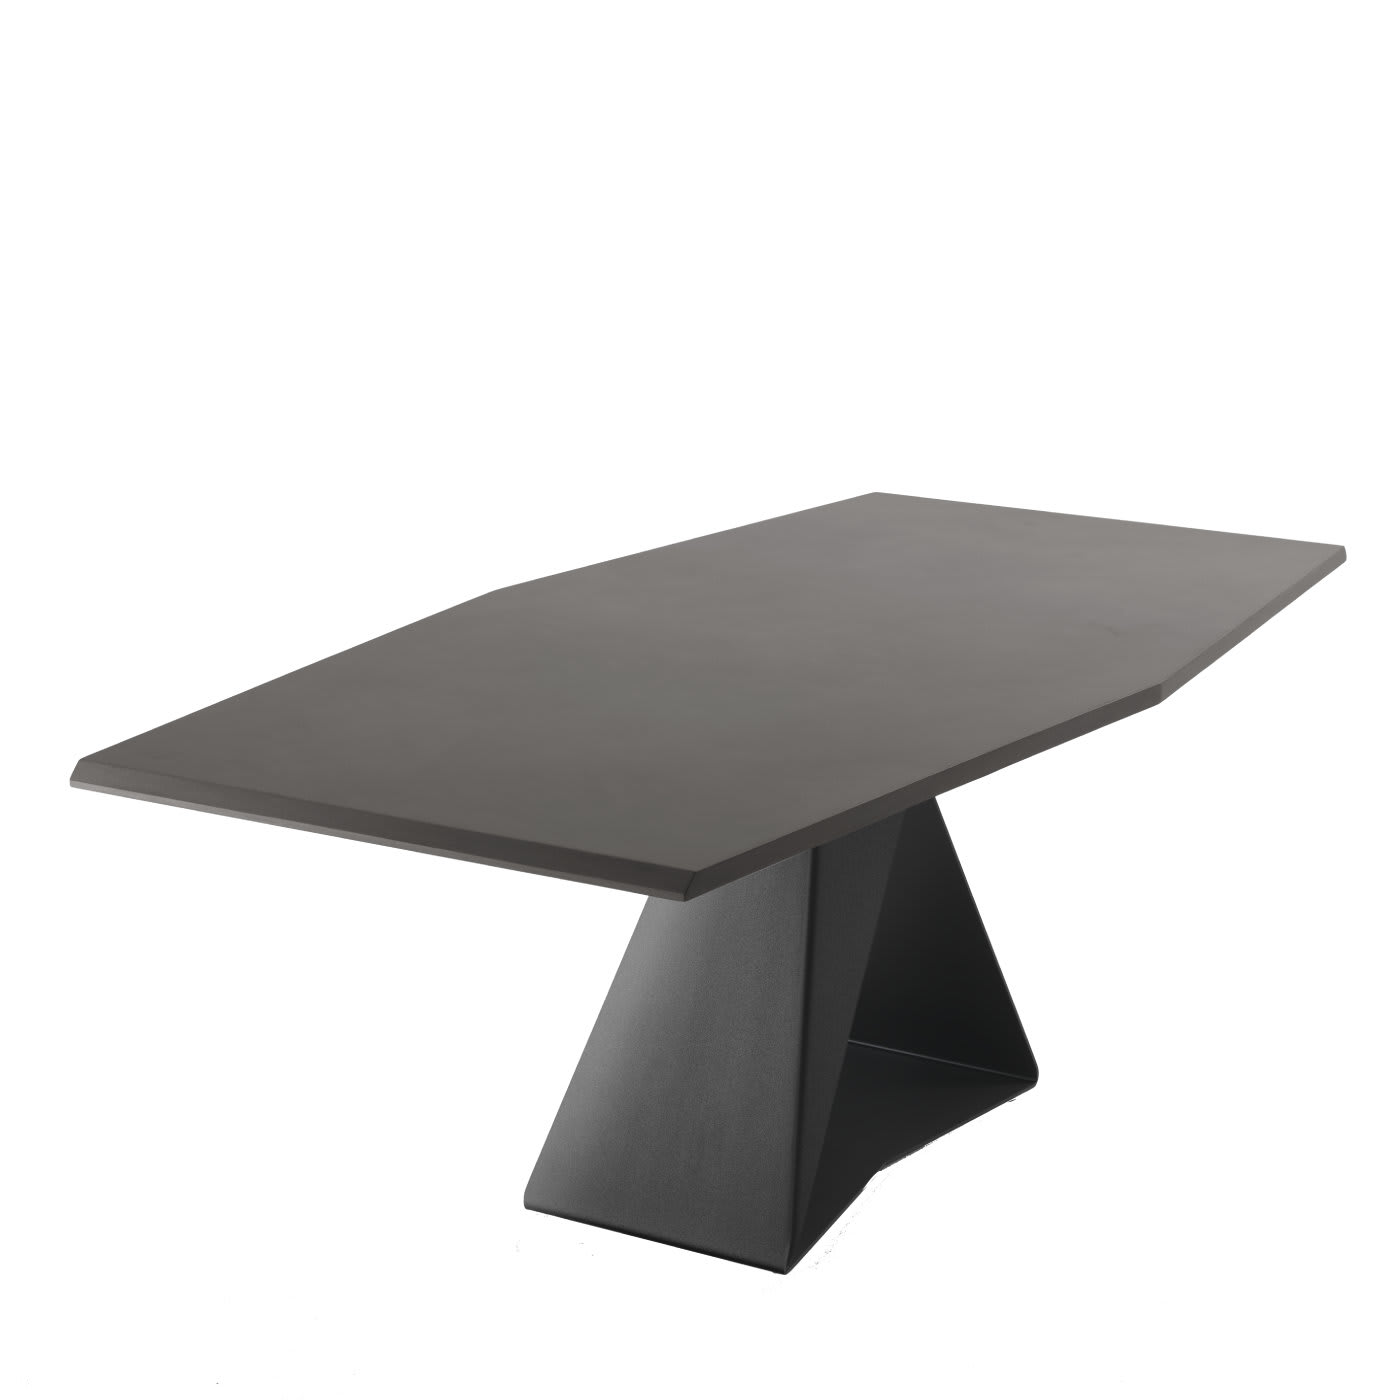 Dasar Jr Gray Dining Table - Elite To Be